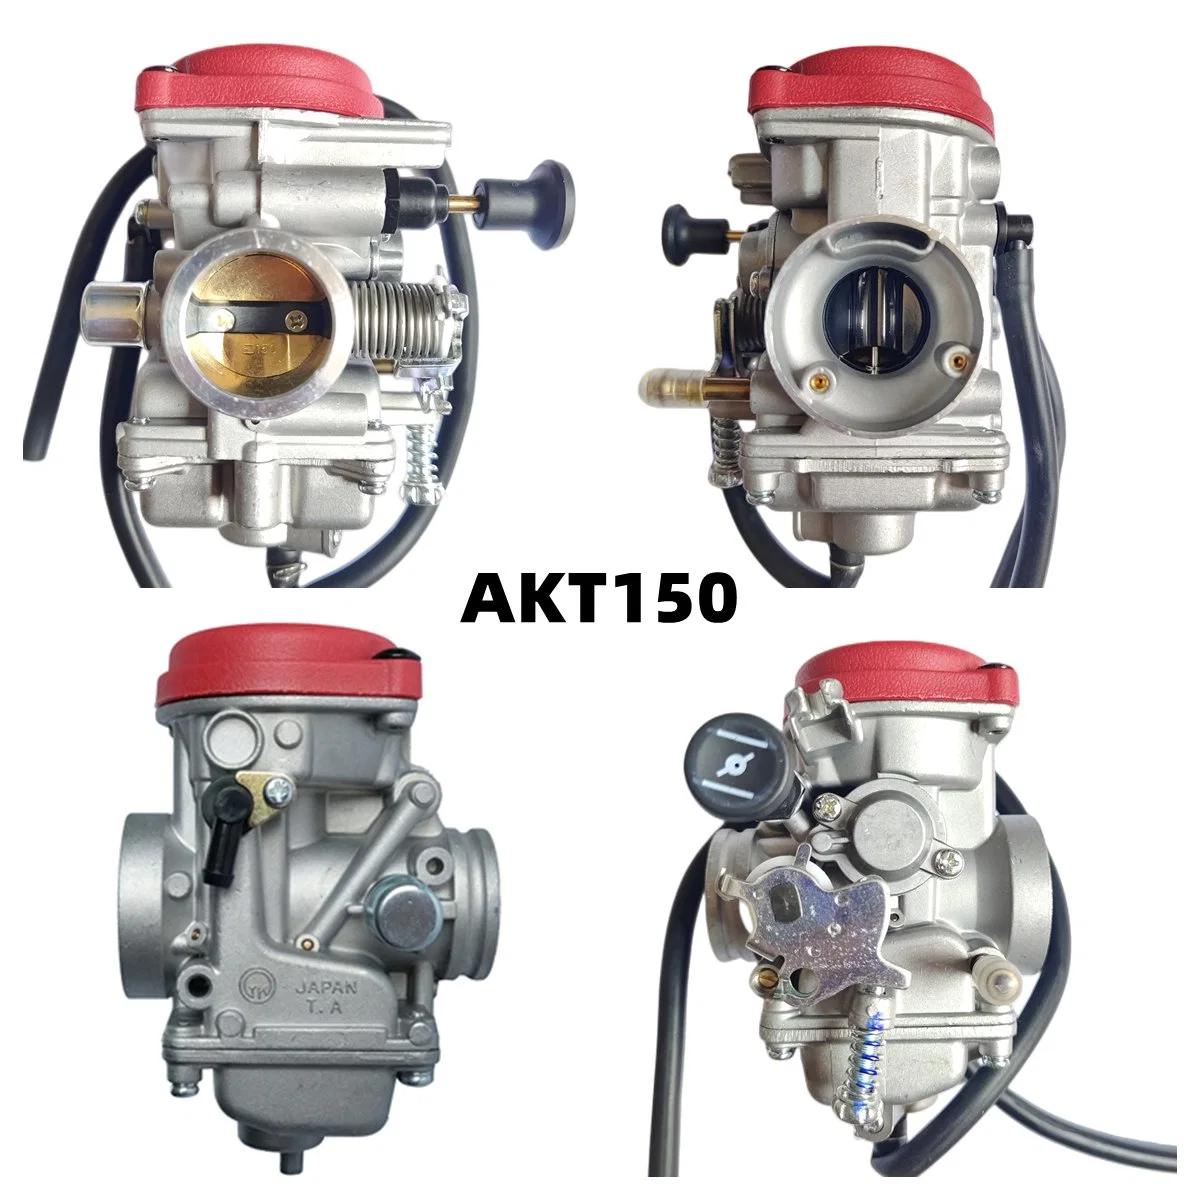 Motorcycle Parts Engine Carburetor for Akt150 China Manufacture